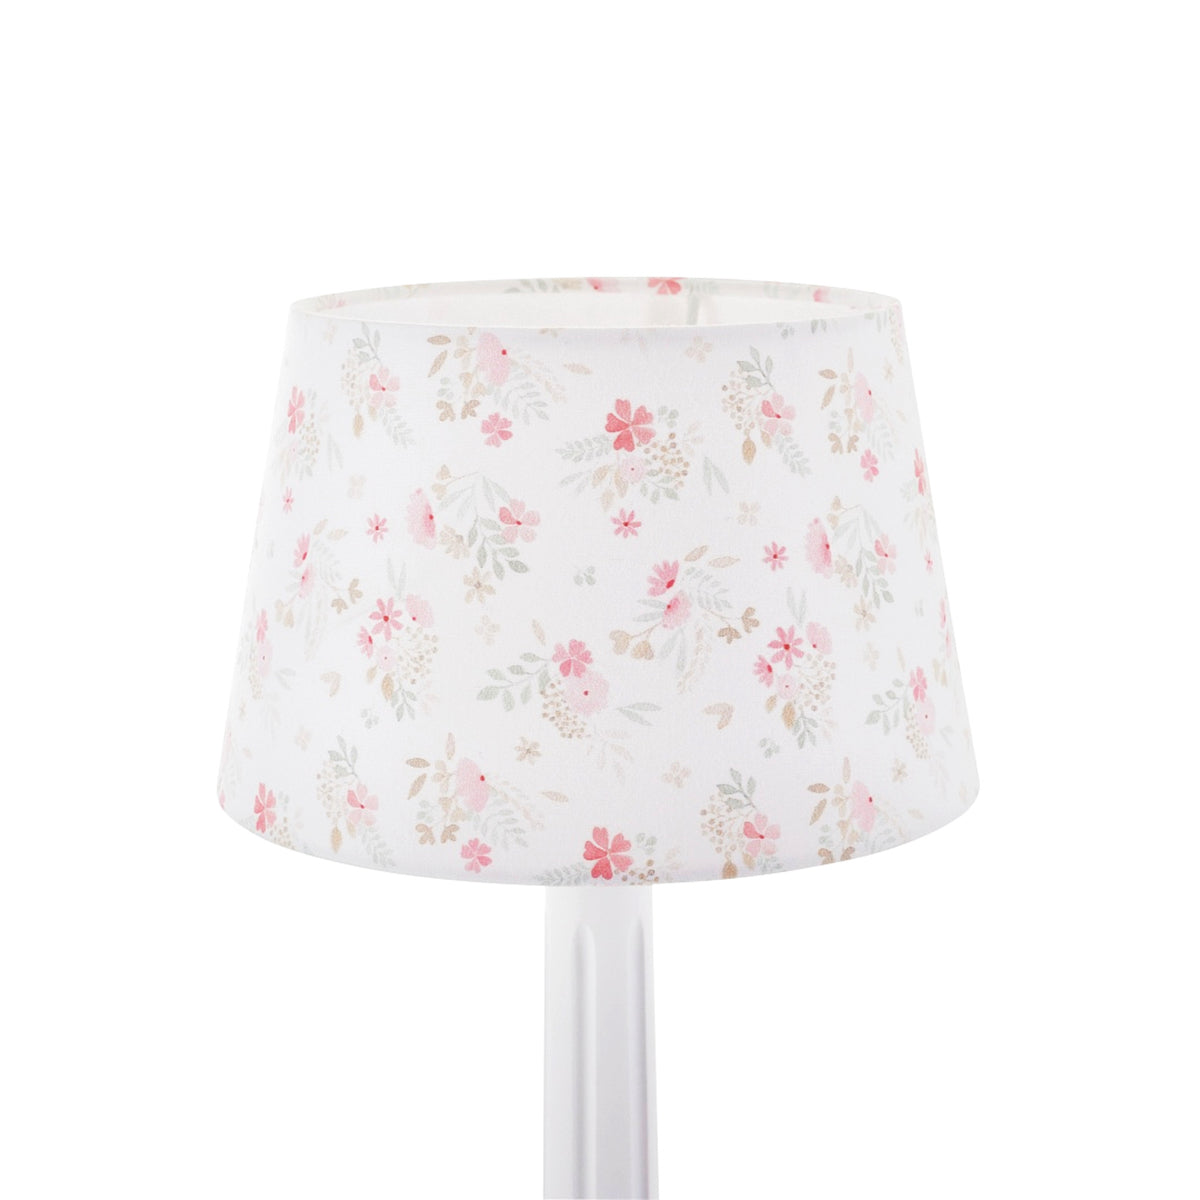 Theophile & Patachou Small Printed Lampshade - Pink Flower